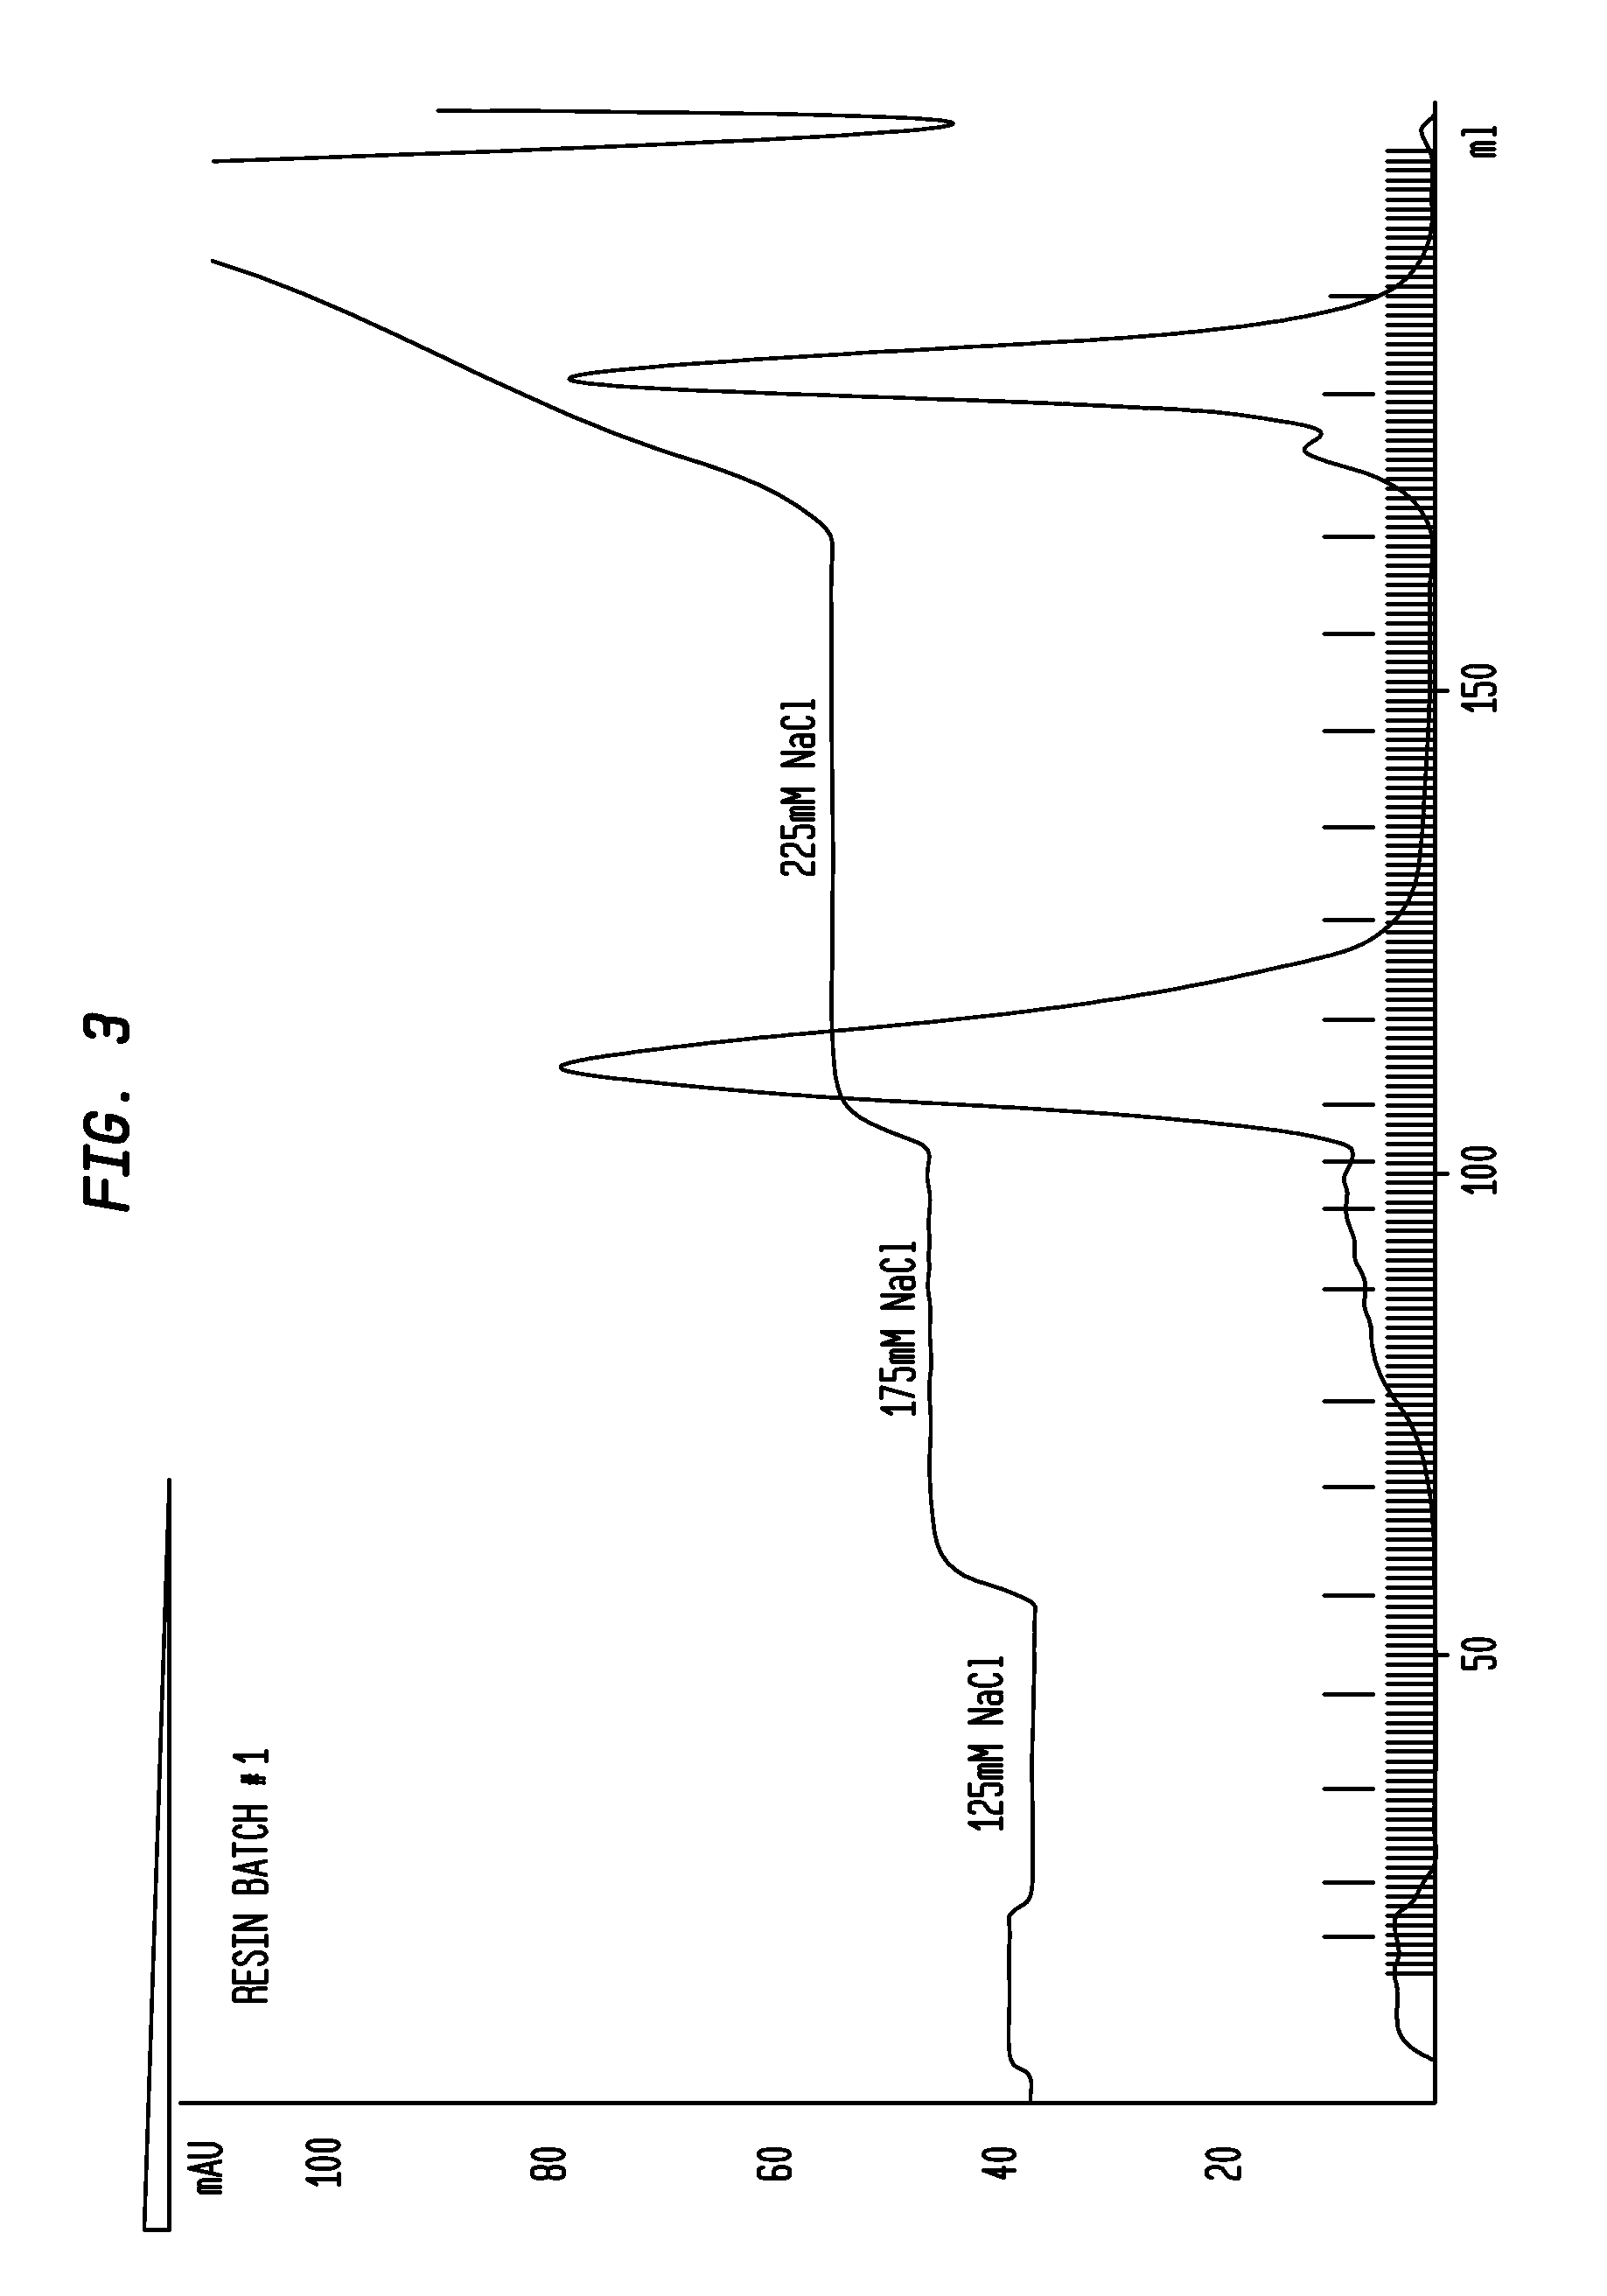 Purified rhIGF-I/rhIGFBP-3 complexes and their method of manufacture